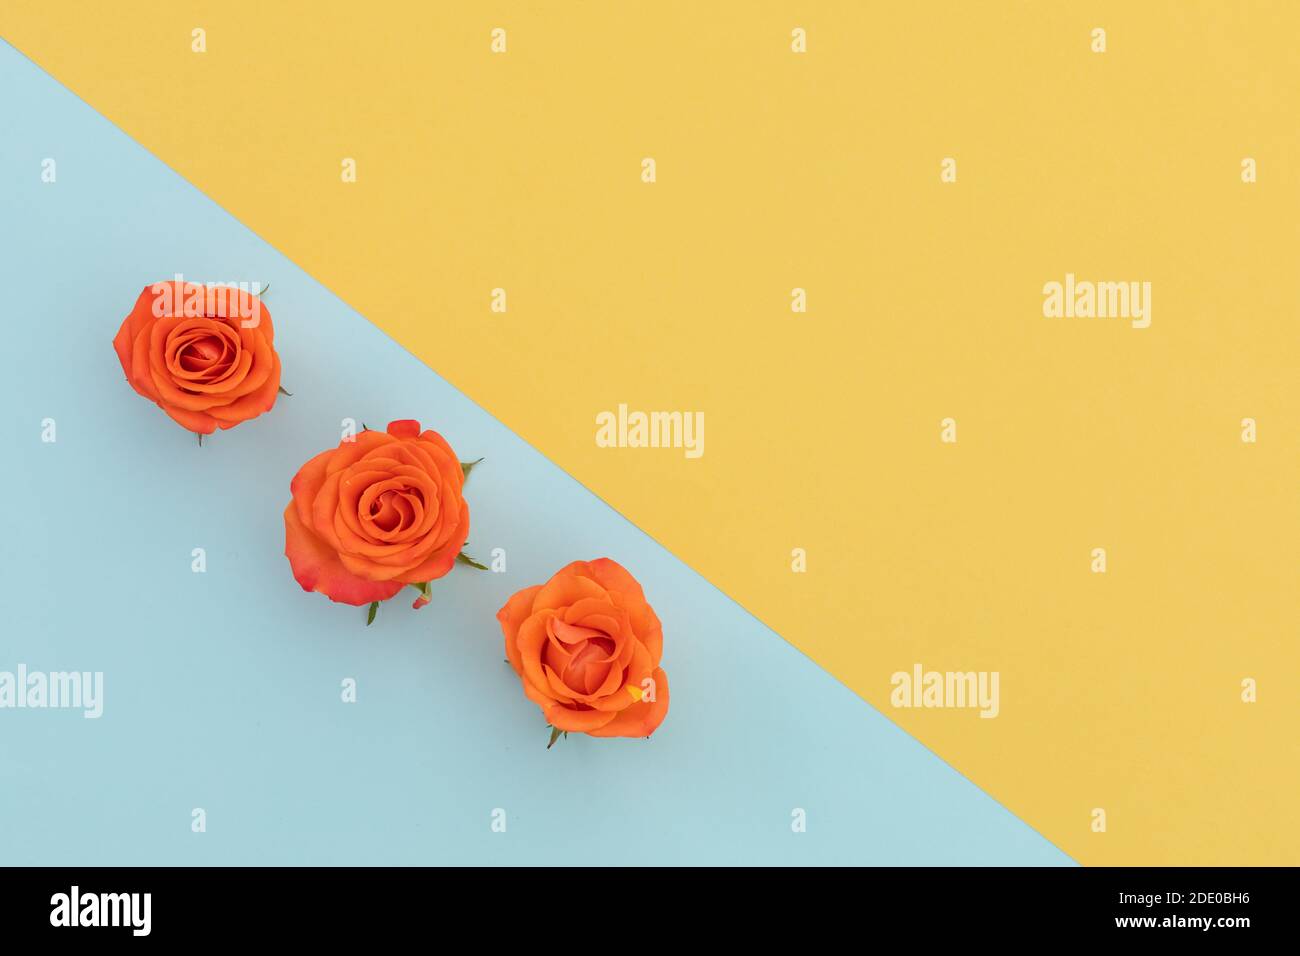 Three orange roses on blue and yellow diagonally divided background Stock Photo